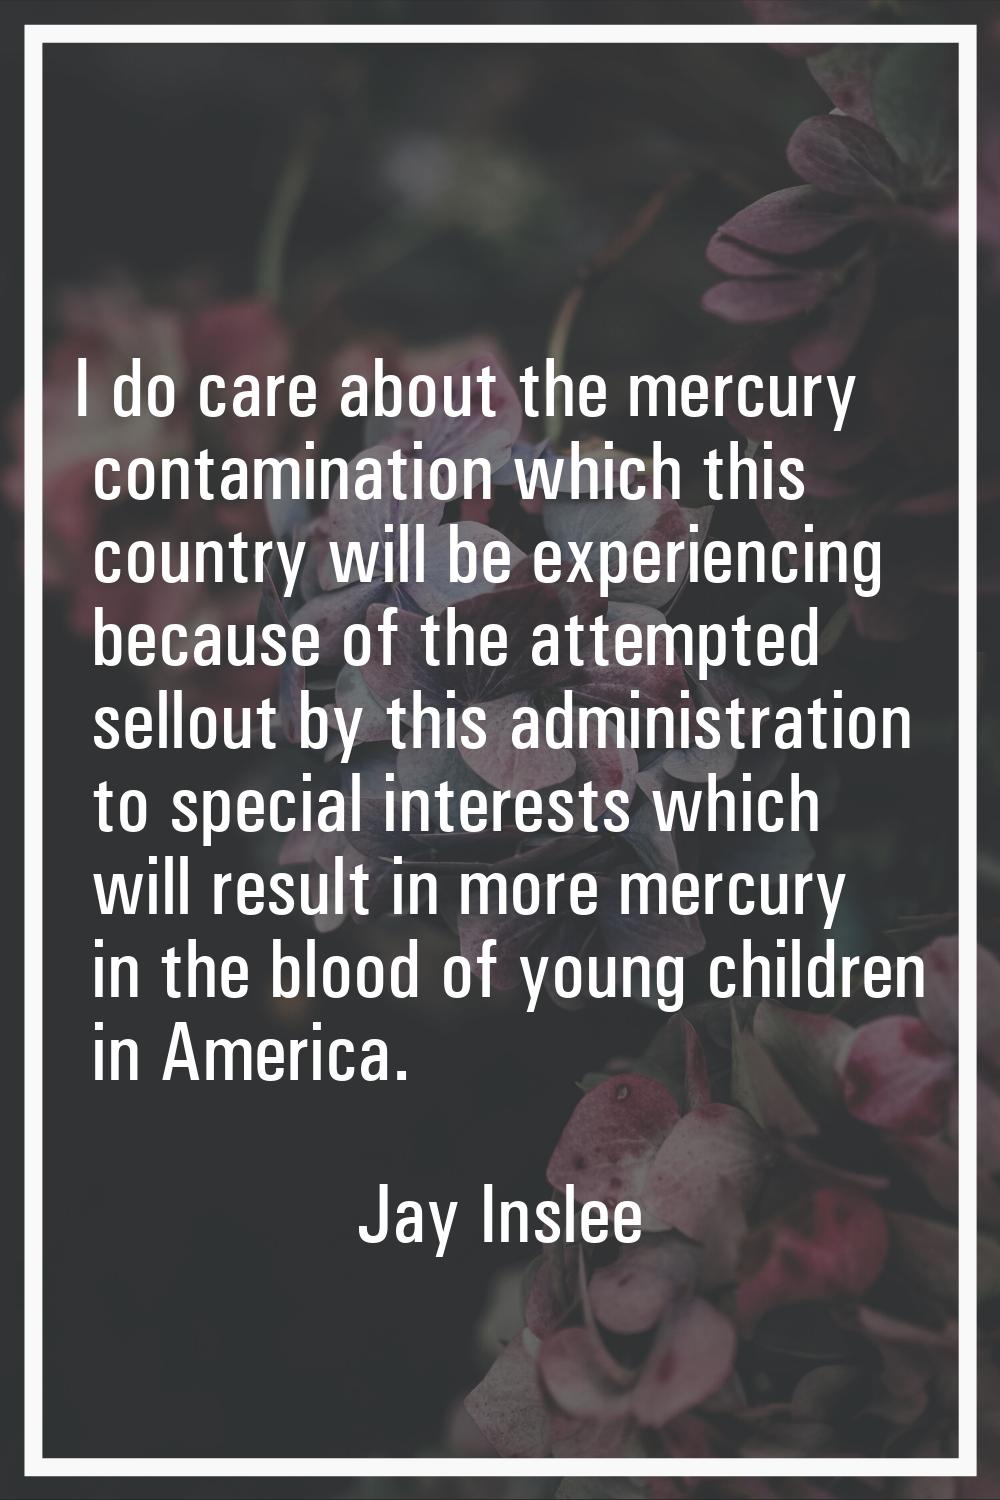 I do care about the mercury contamination which this country will be experiencing because of the at